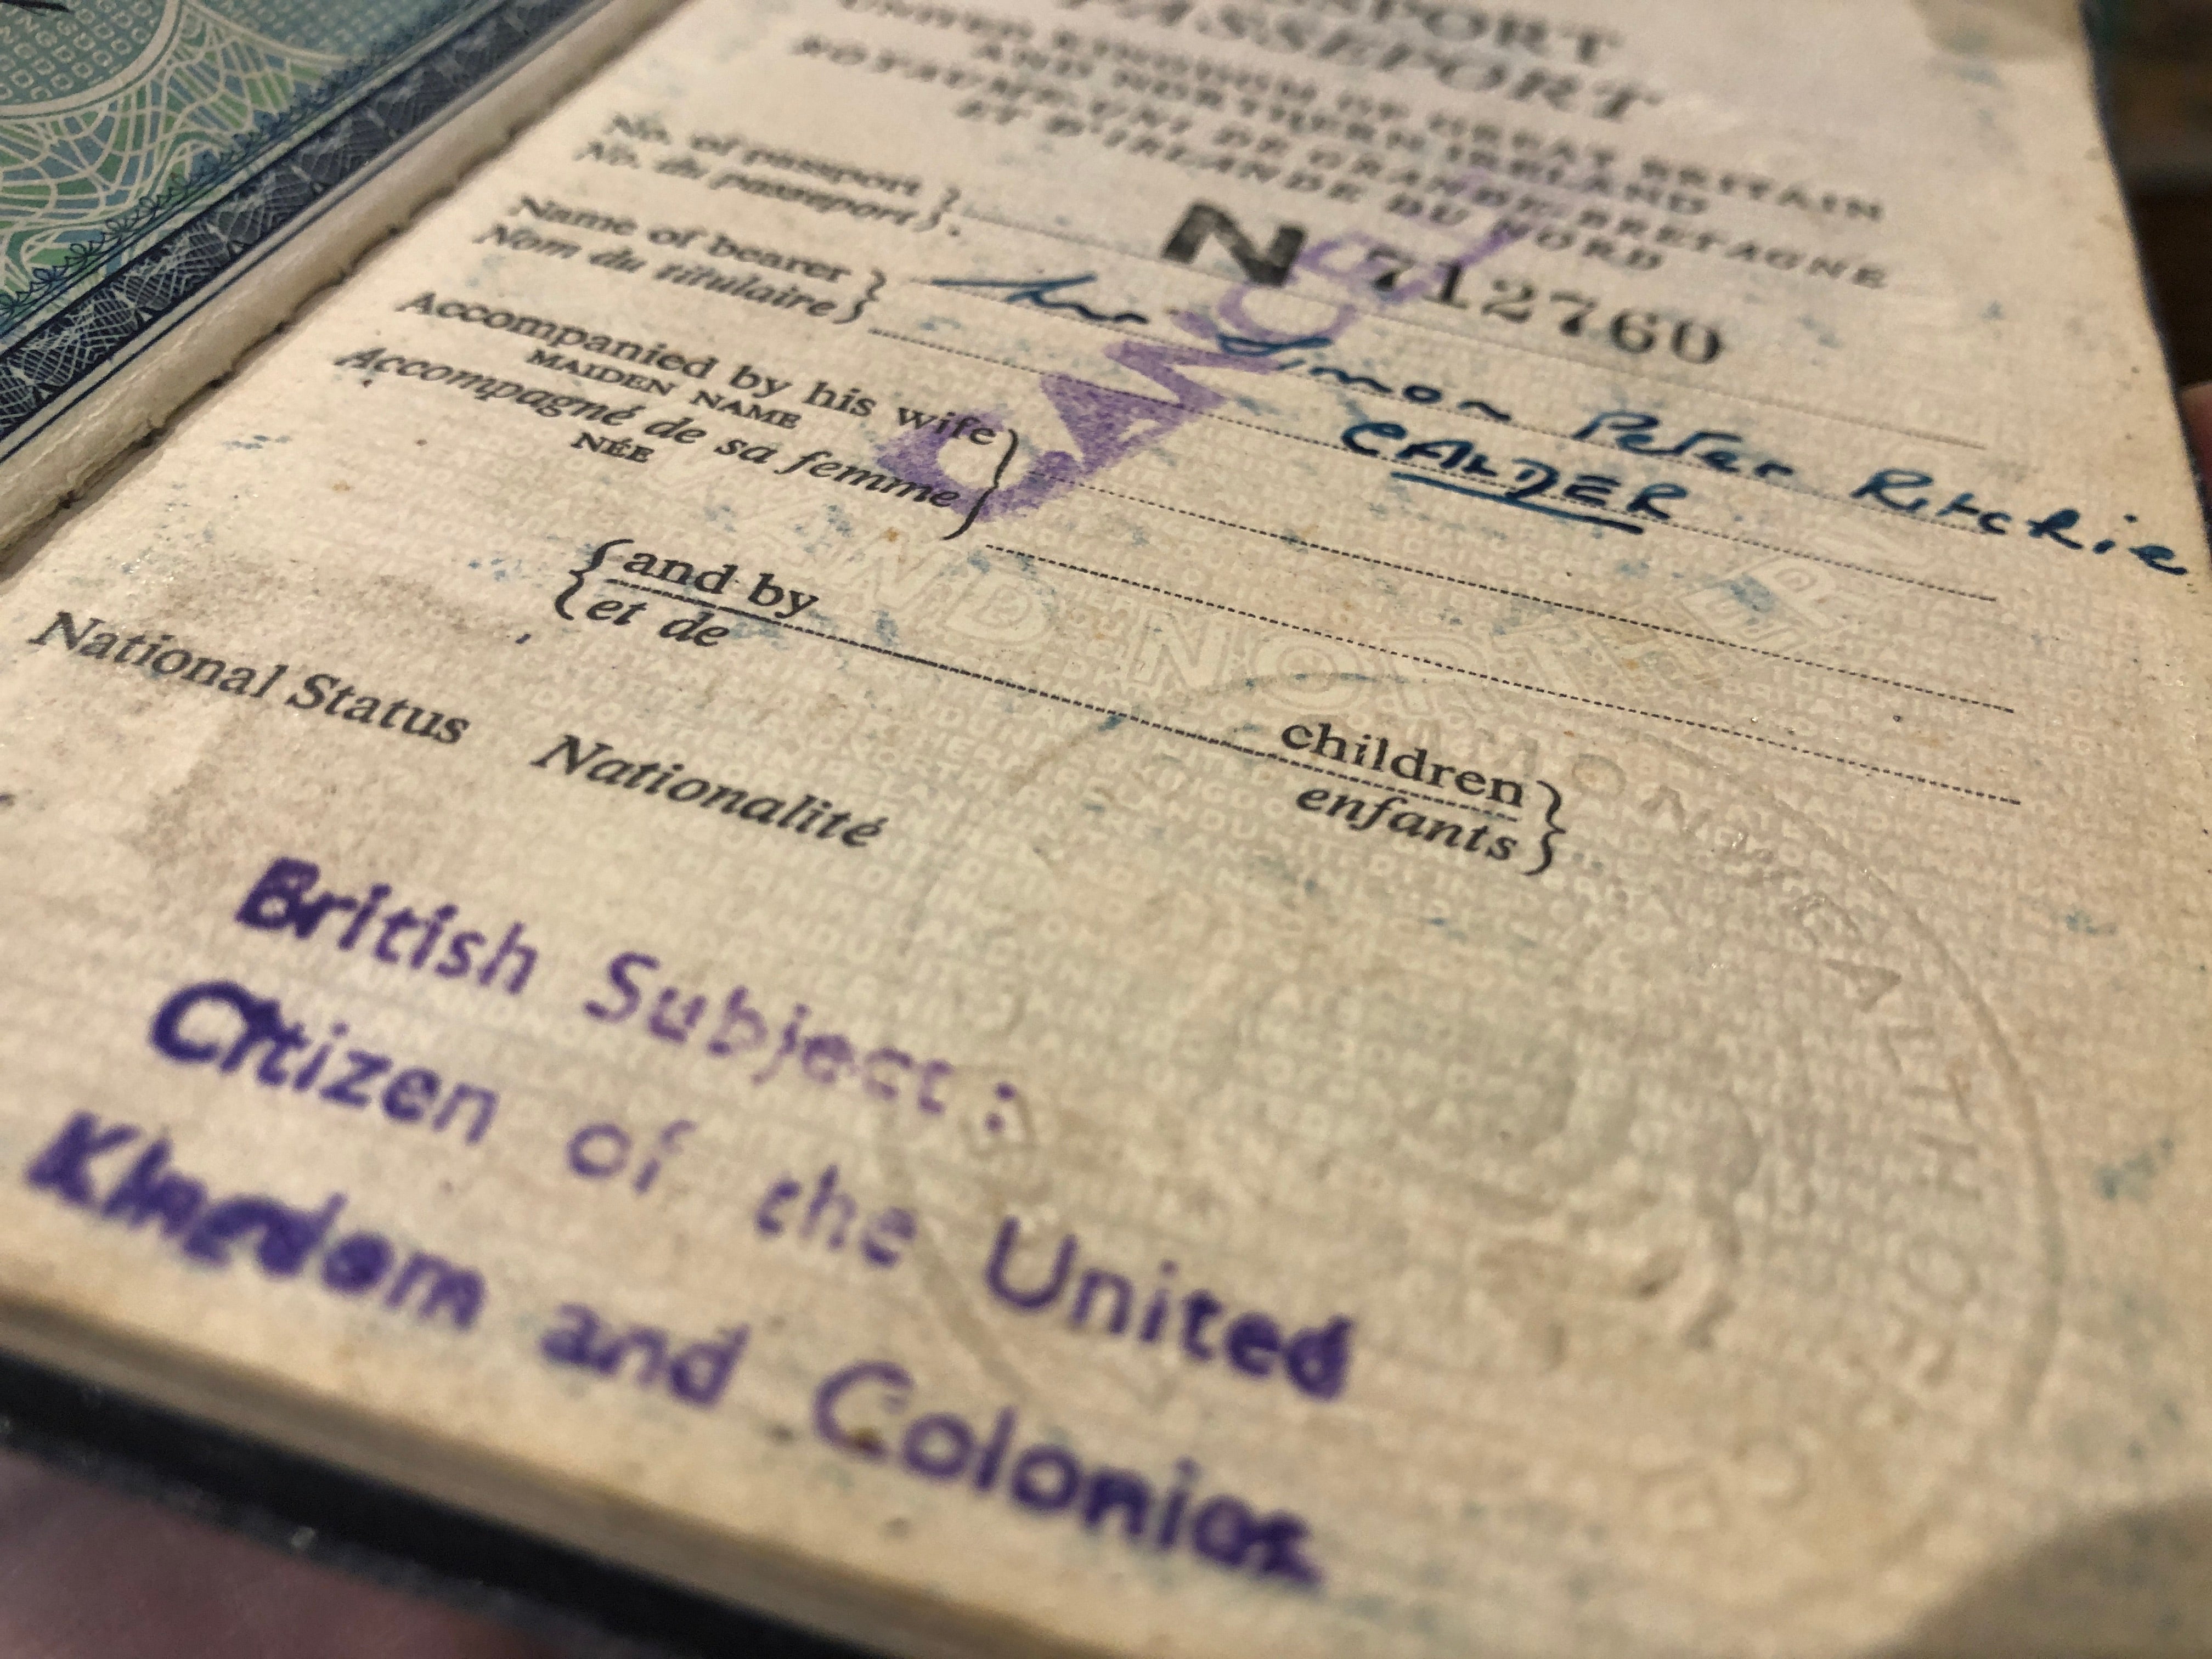 Going places: a 1970s passport